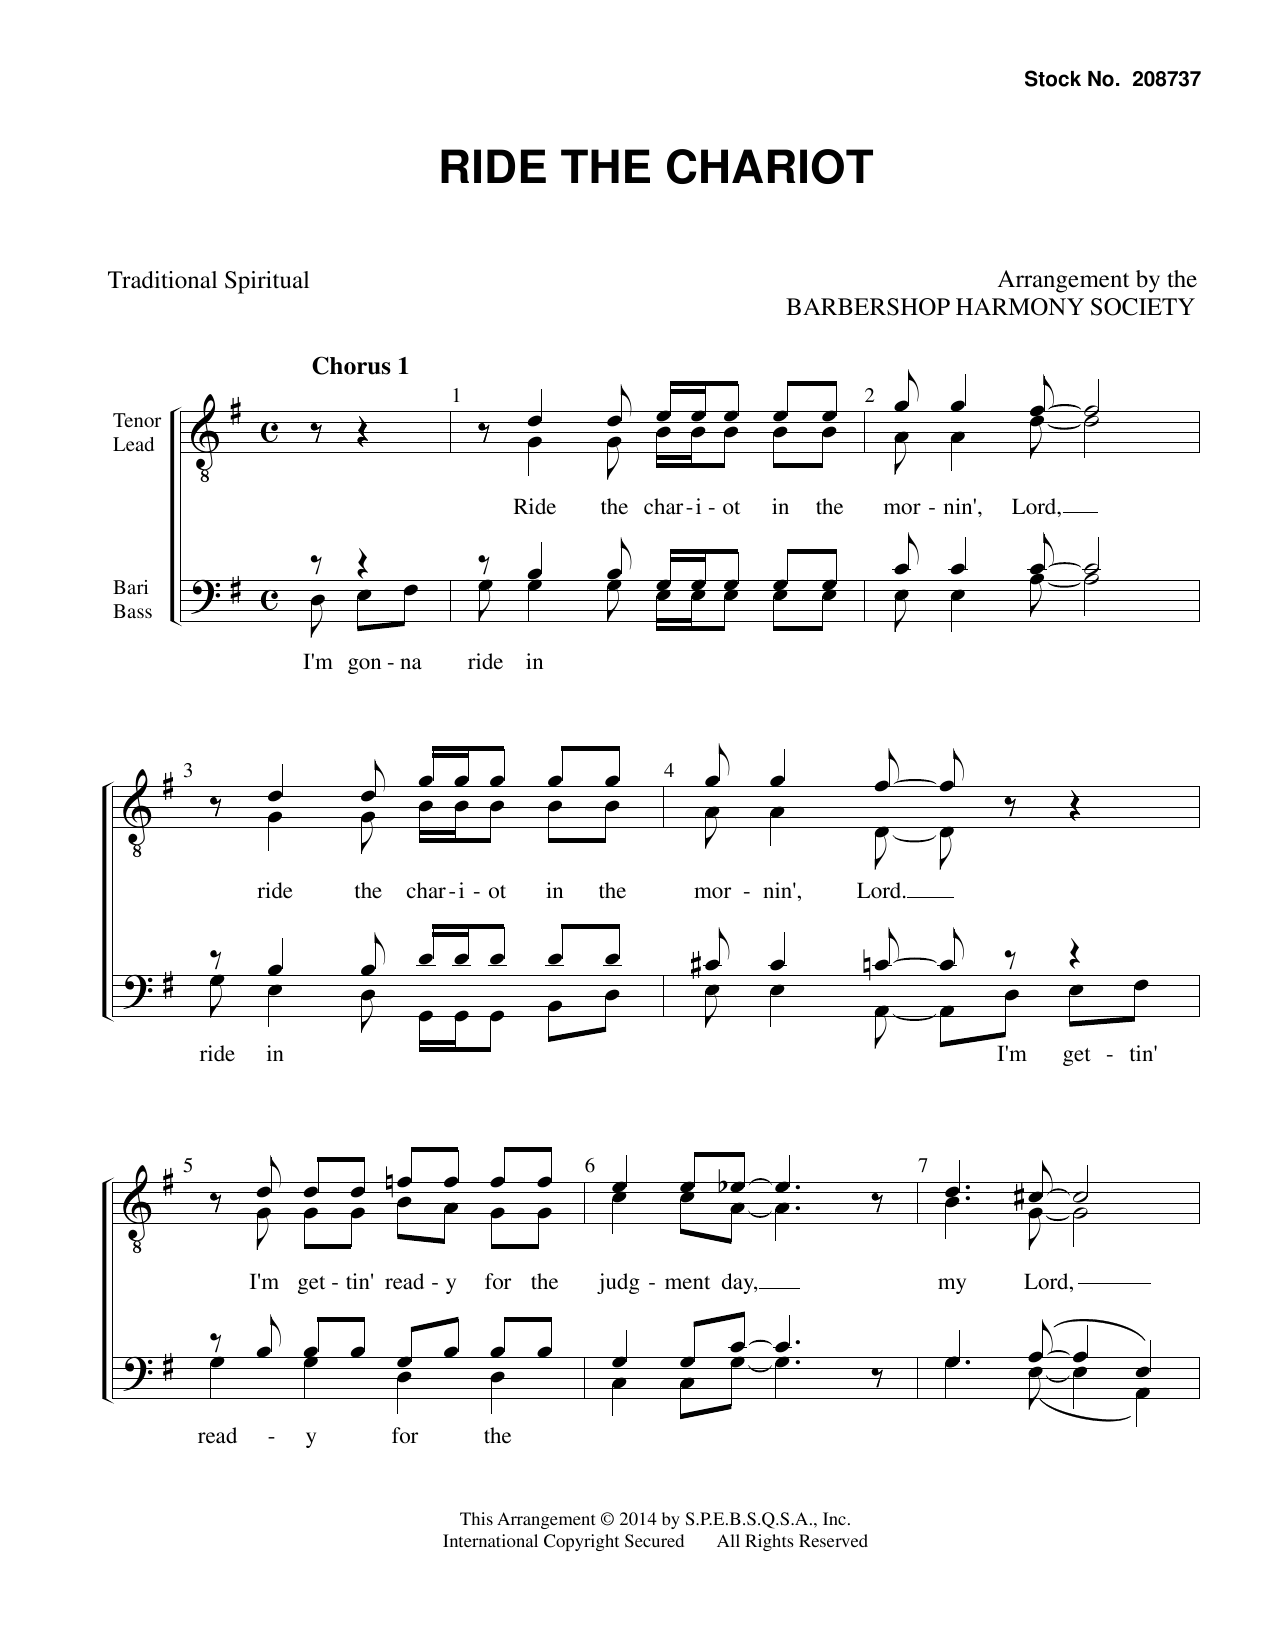 Download Traditional Ride the Chariot (arr. Barbershop Harmo Sheet Music